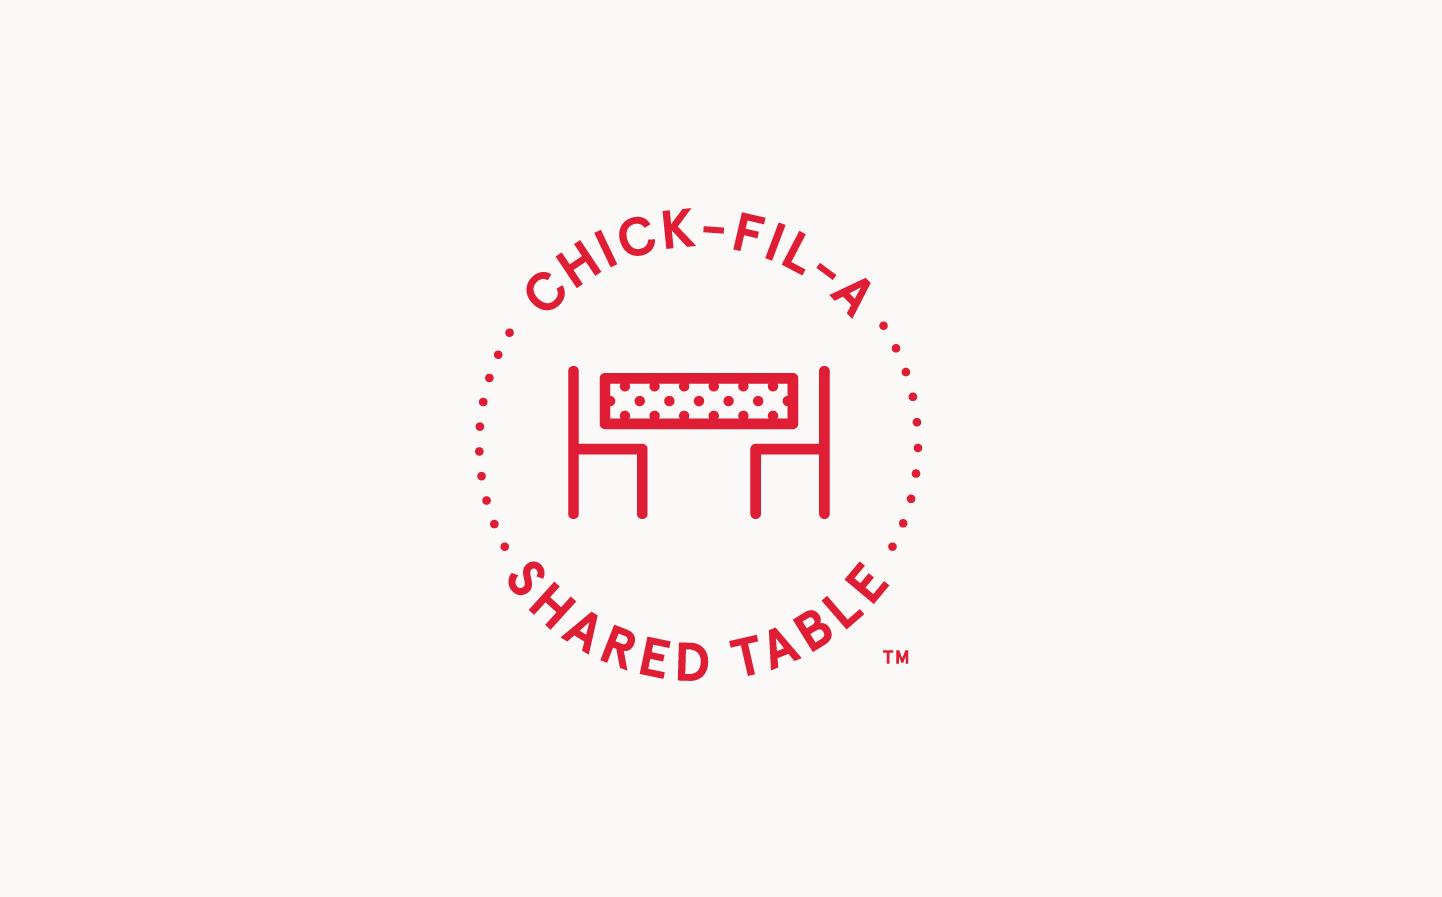 The Chick-fil-A Shared Table logo in red on a white background. 